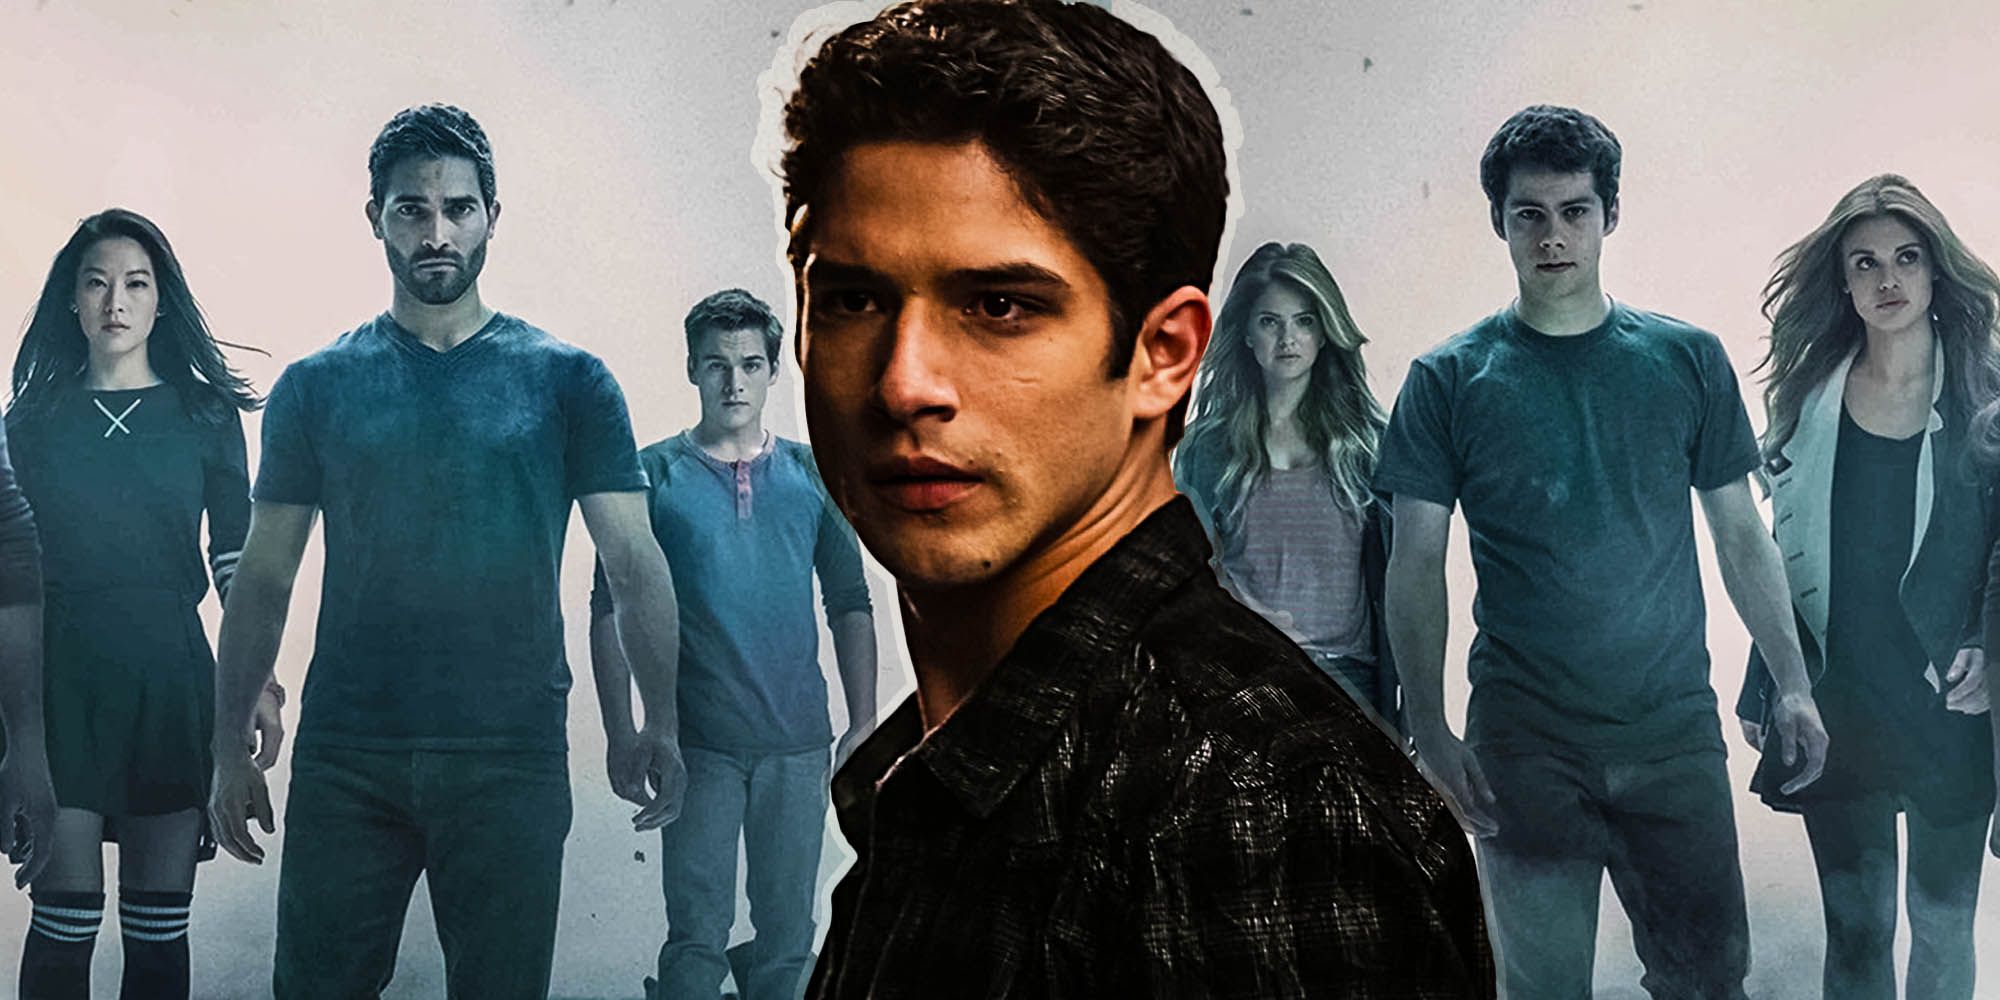 Teen Wolf: the cast will return to Paris in 2024 - Roster Con